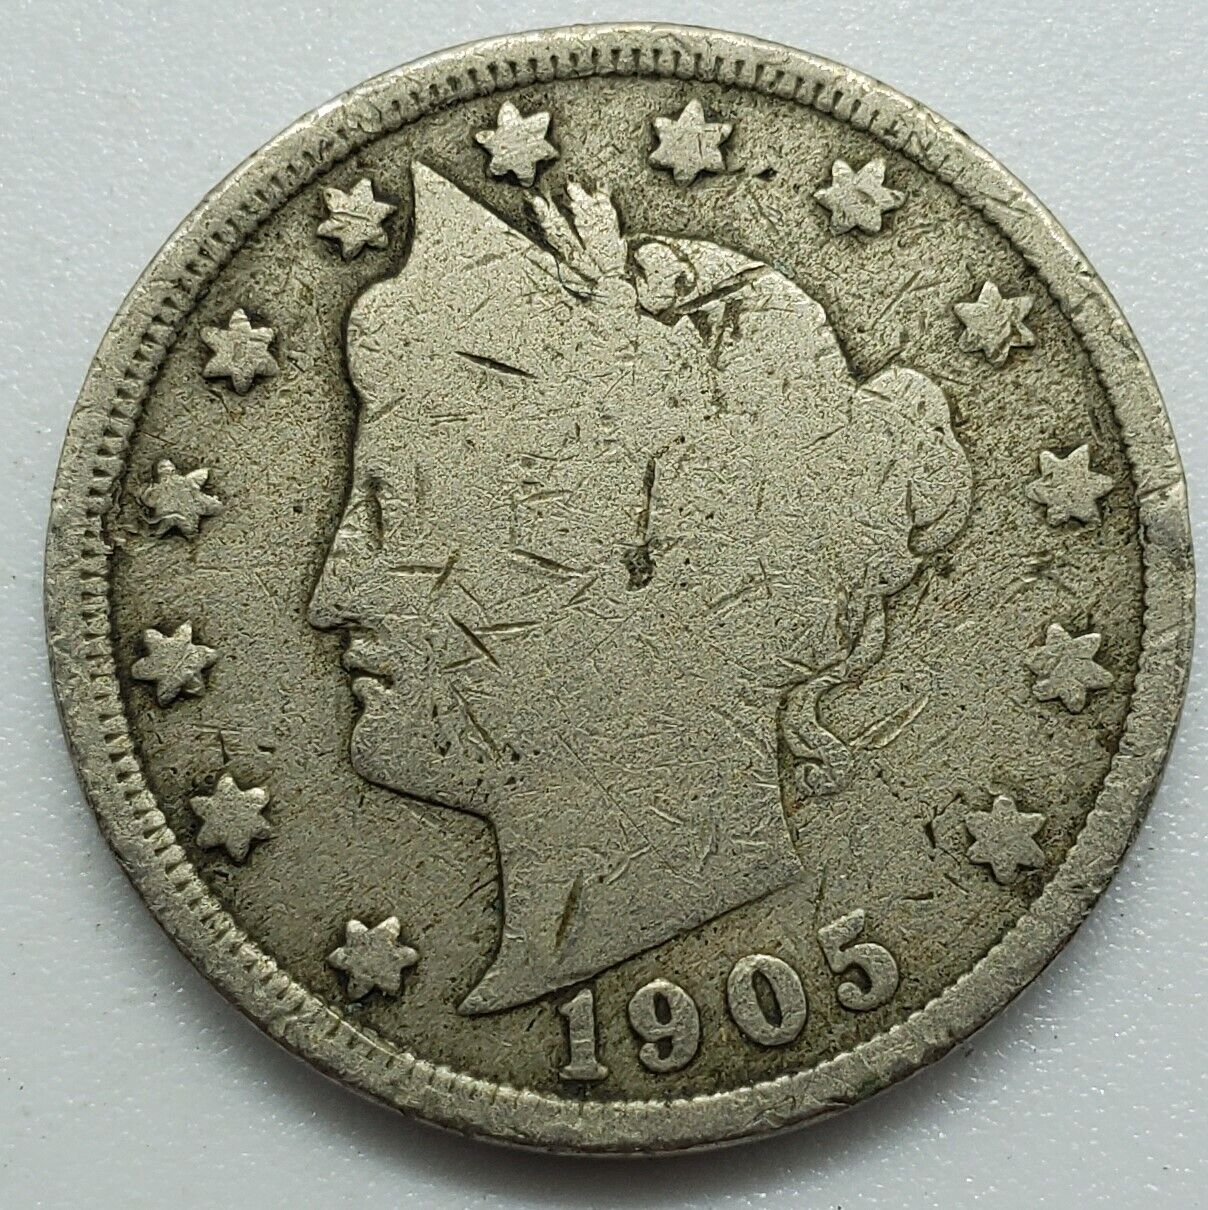 1905 Liberty V New product type Nickel Max 52% OFF Cents US #50 Coin